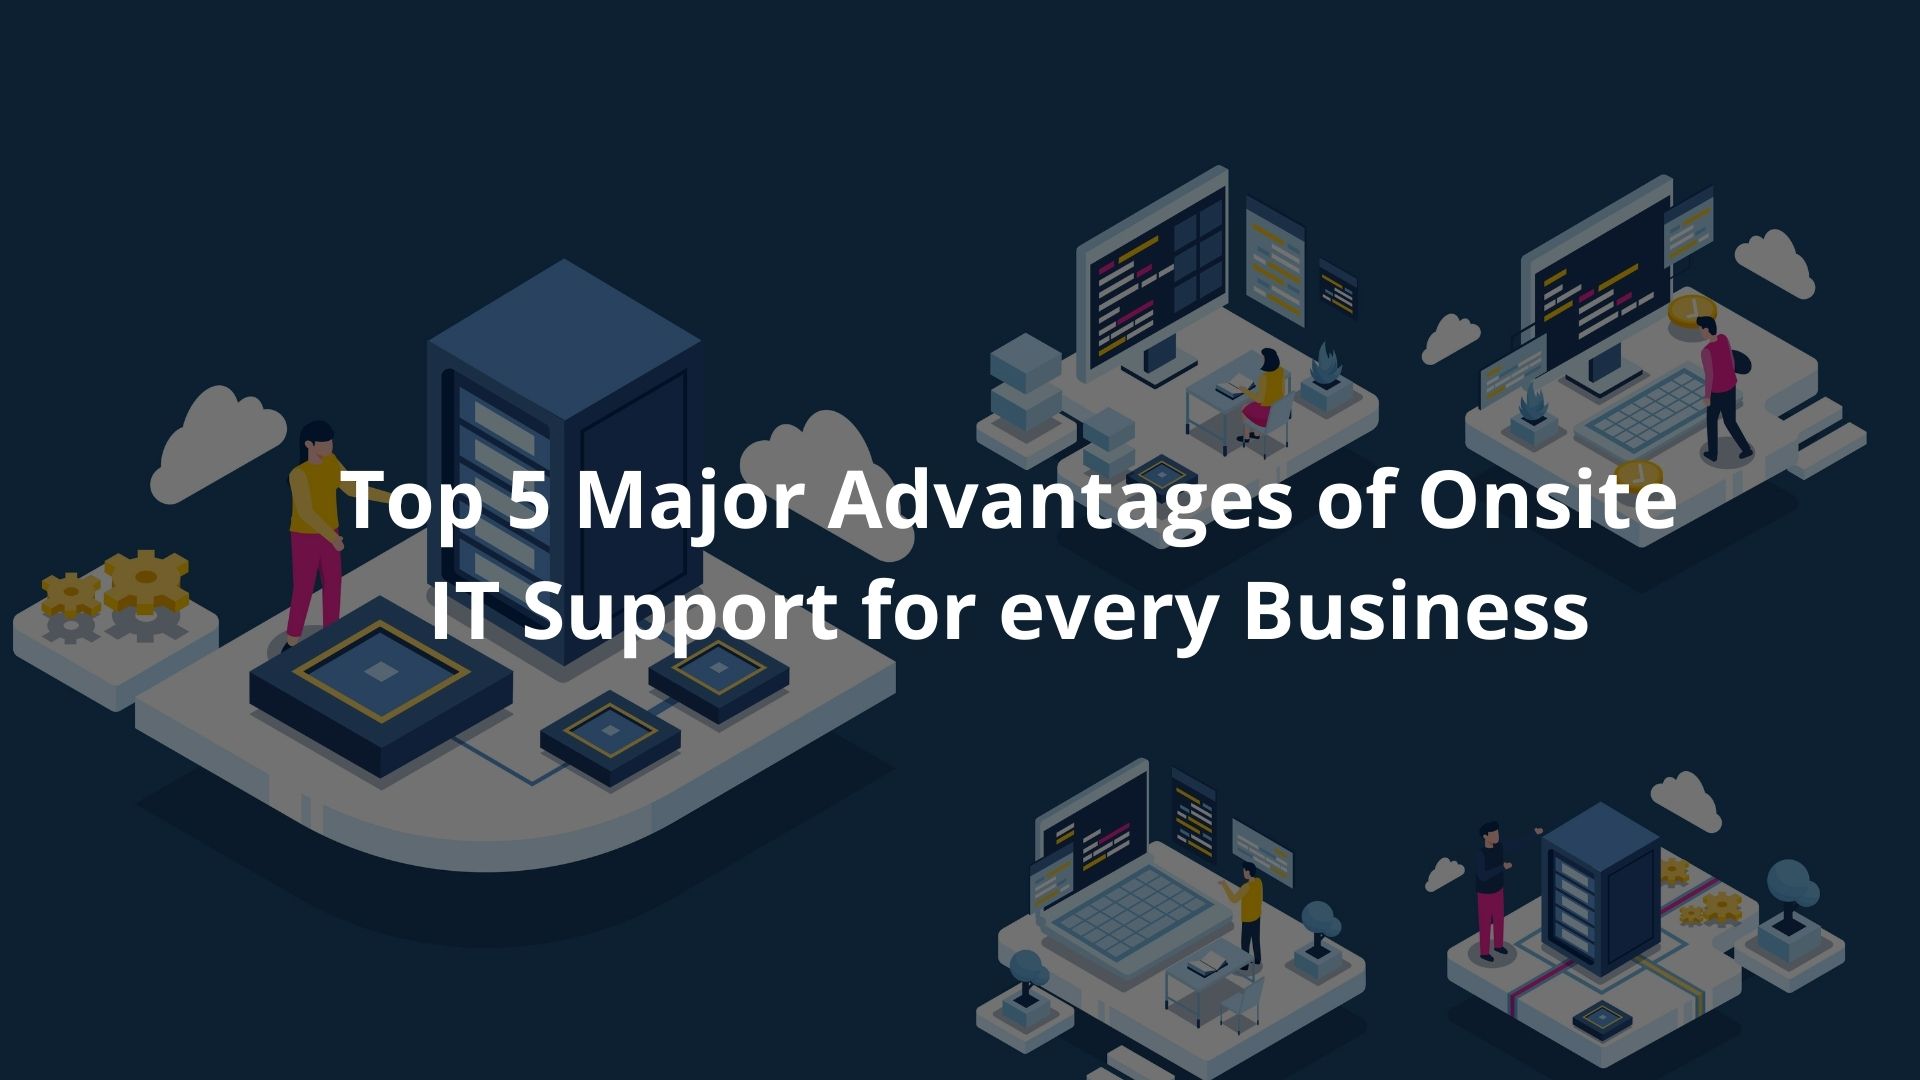 Top 5 Major Advantages of Onsite IT Support for every Business